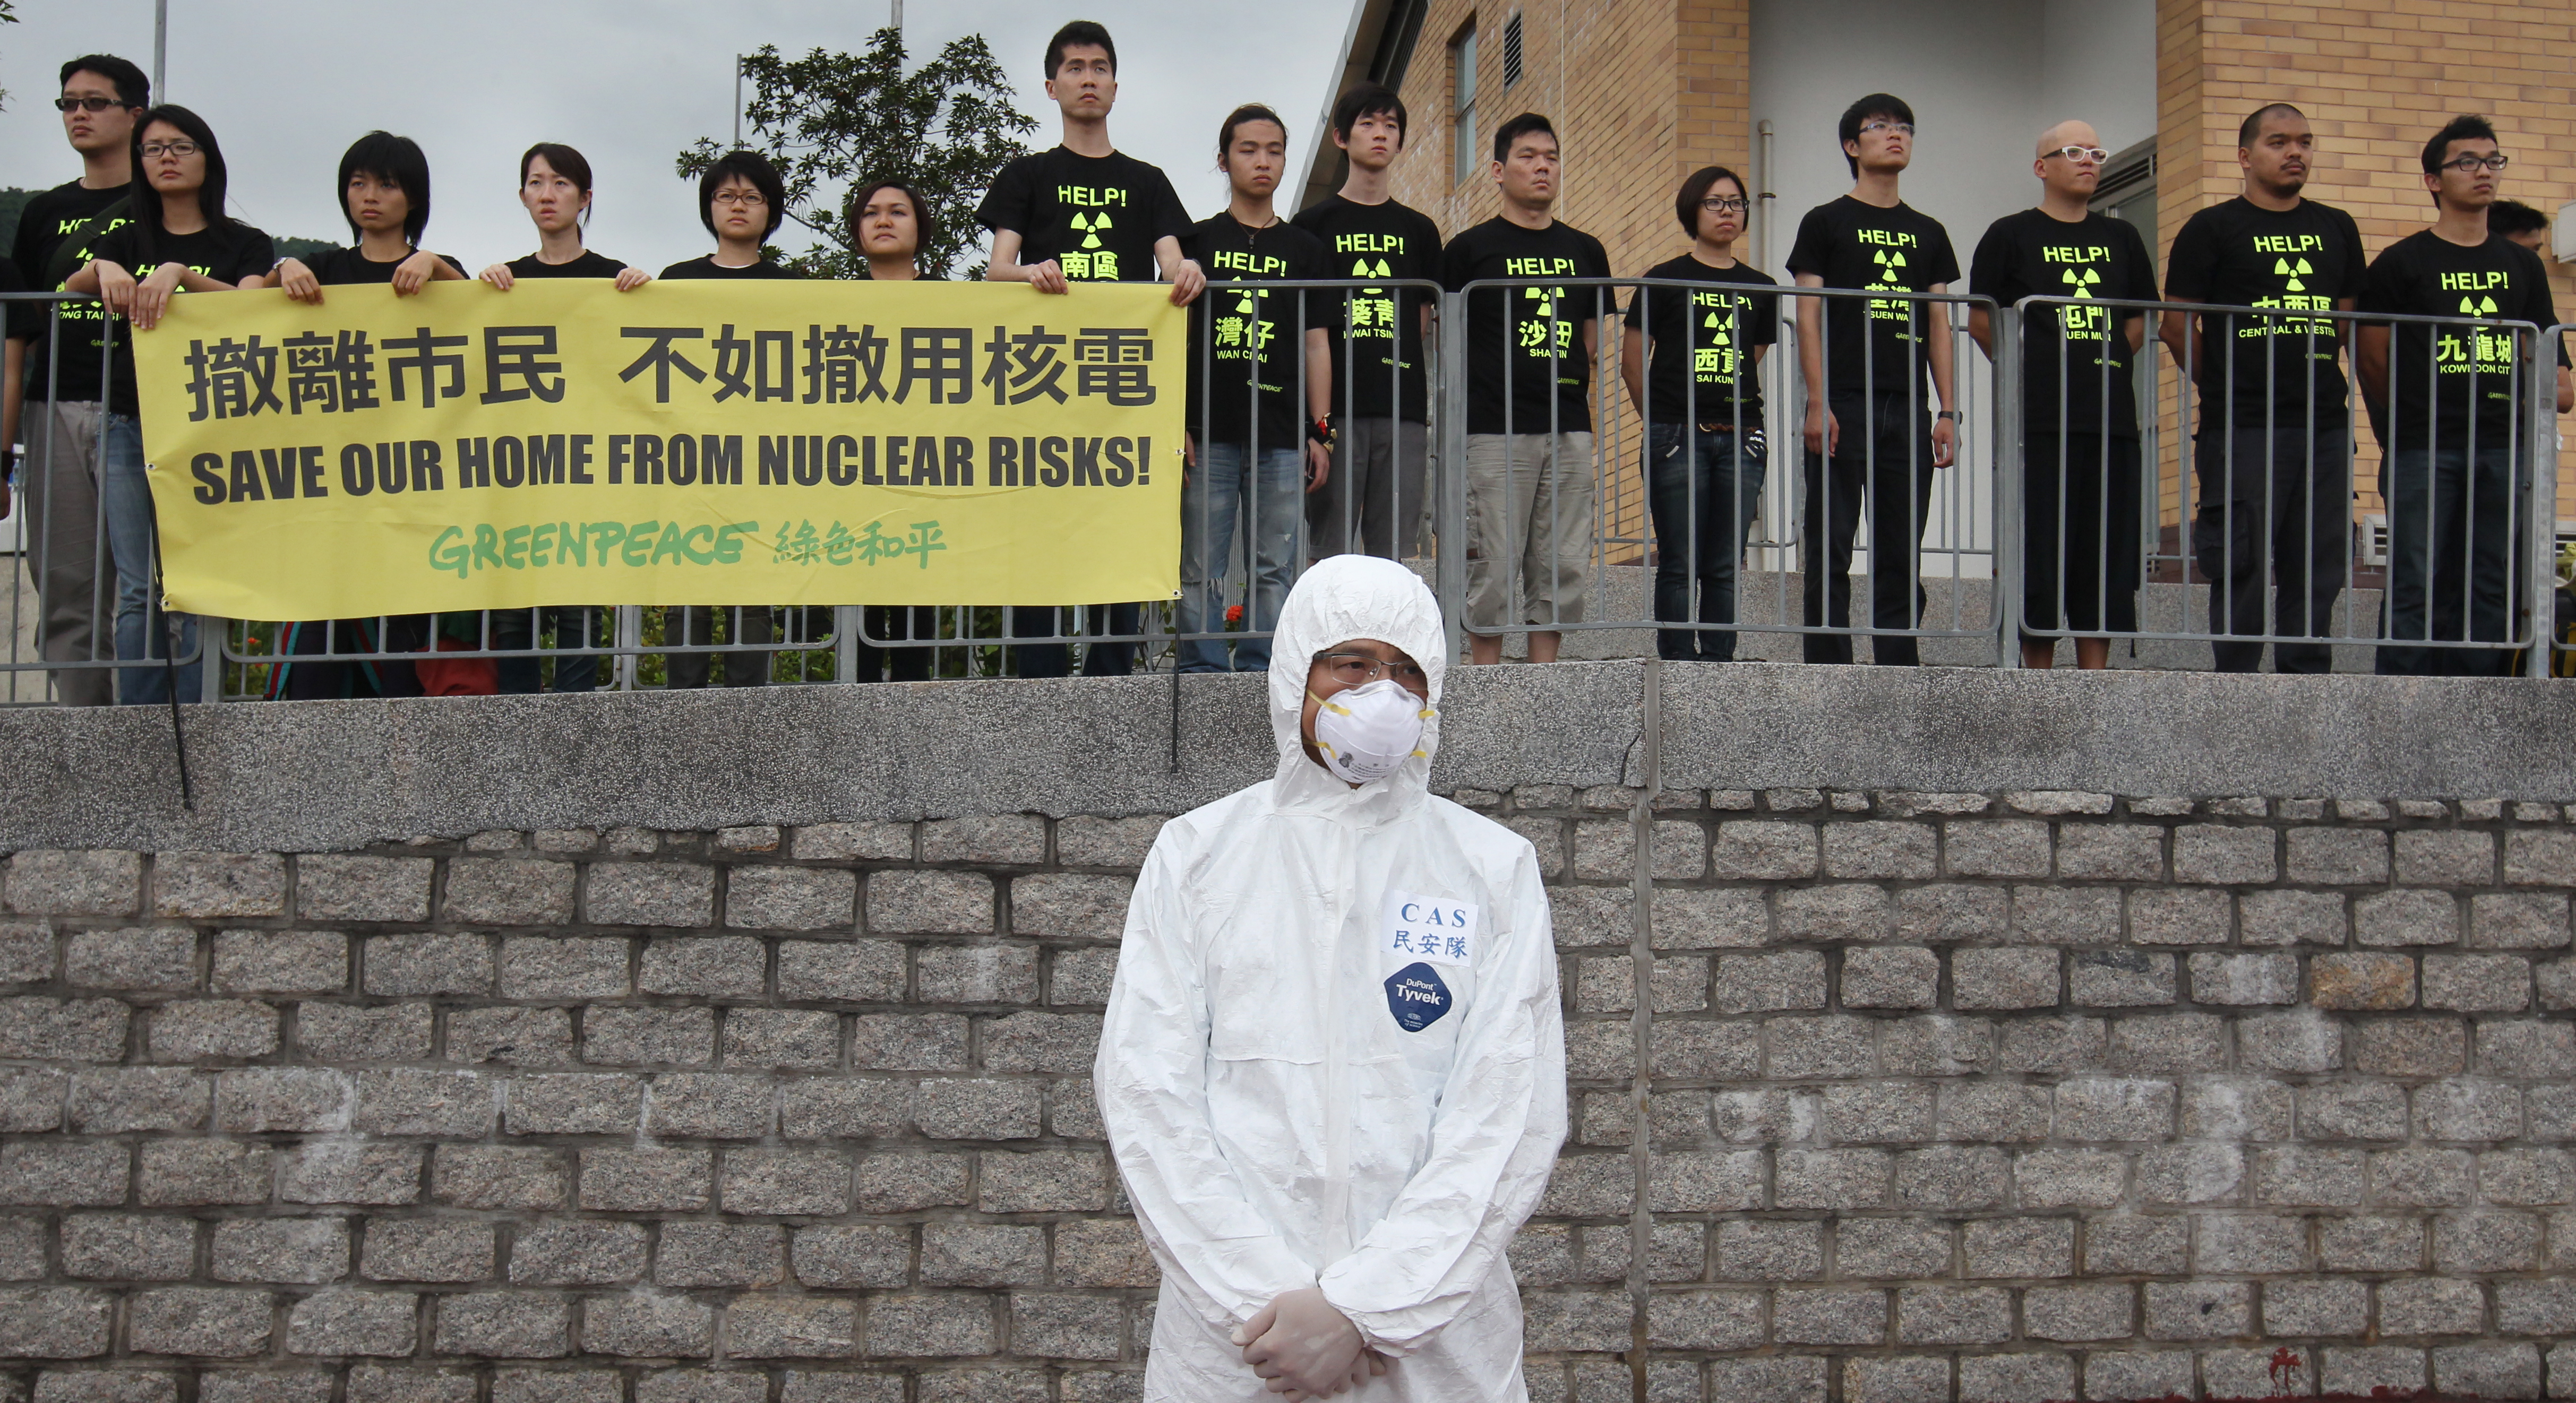 A rescue worker wearing a protective suit stands in front of protesters from Greenpeace near the Ma Liu Shui Ferry Pier during an evacuation drill at Daya Bay Nuclear Plant, as they demand the Hong Kong government to phase out nuclear plants, in Hong Kong Thursday, April 26, 2012. The Hong Kong government conducted the major interdepartmental exercise to prepare for a possible accident at the nuclear plant at Daya Bay in southern China, near Hong Kong. 26APR12